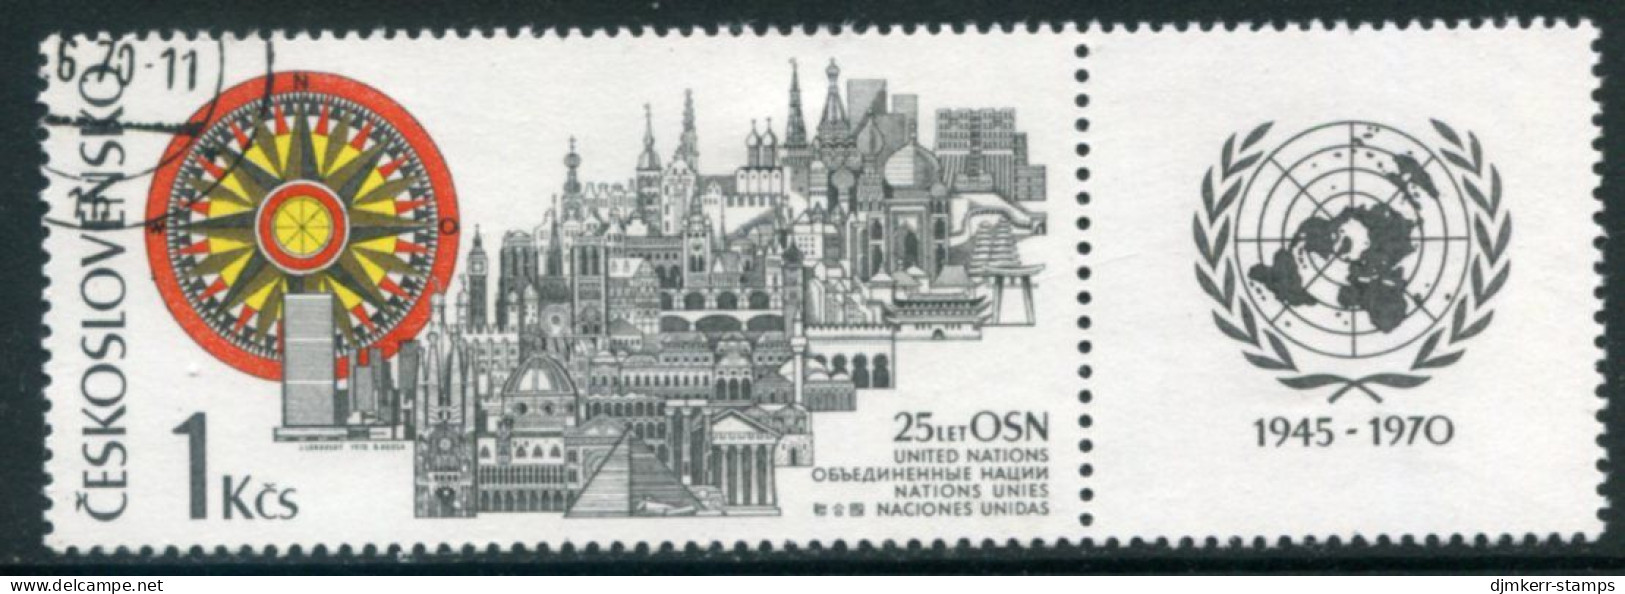 CZECHOSLOVAKIA 1970 UNO 25th Anniversary With Label Used Michel 1945 Zf - Used Stamps